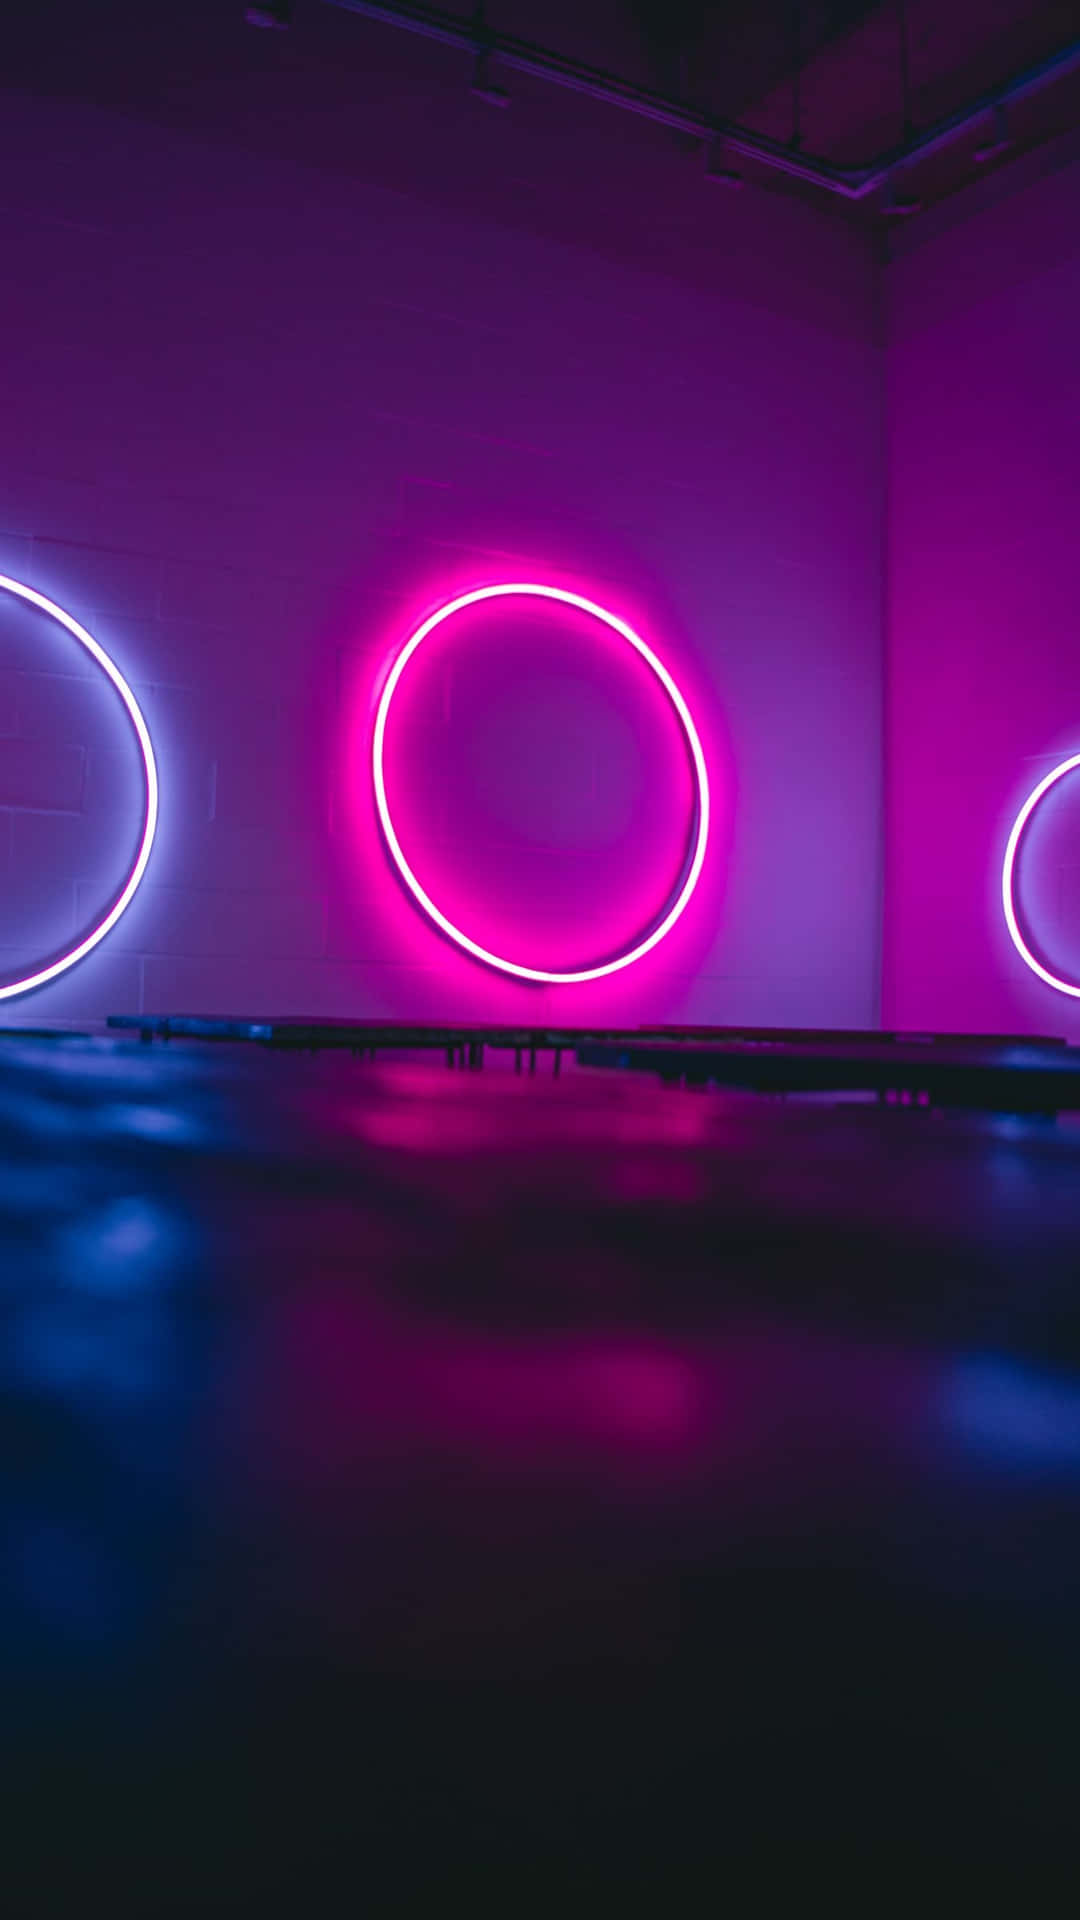 Three Neon Circles In A Room